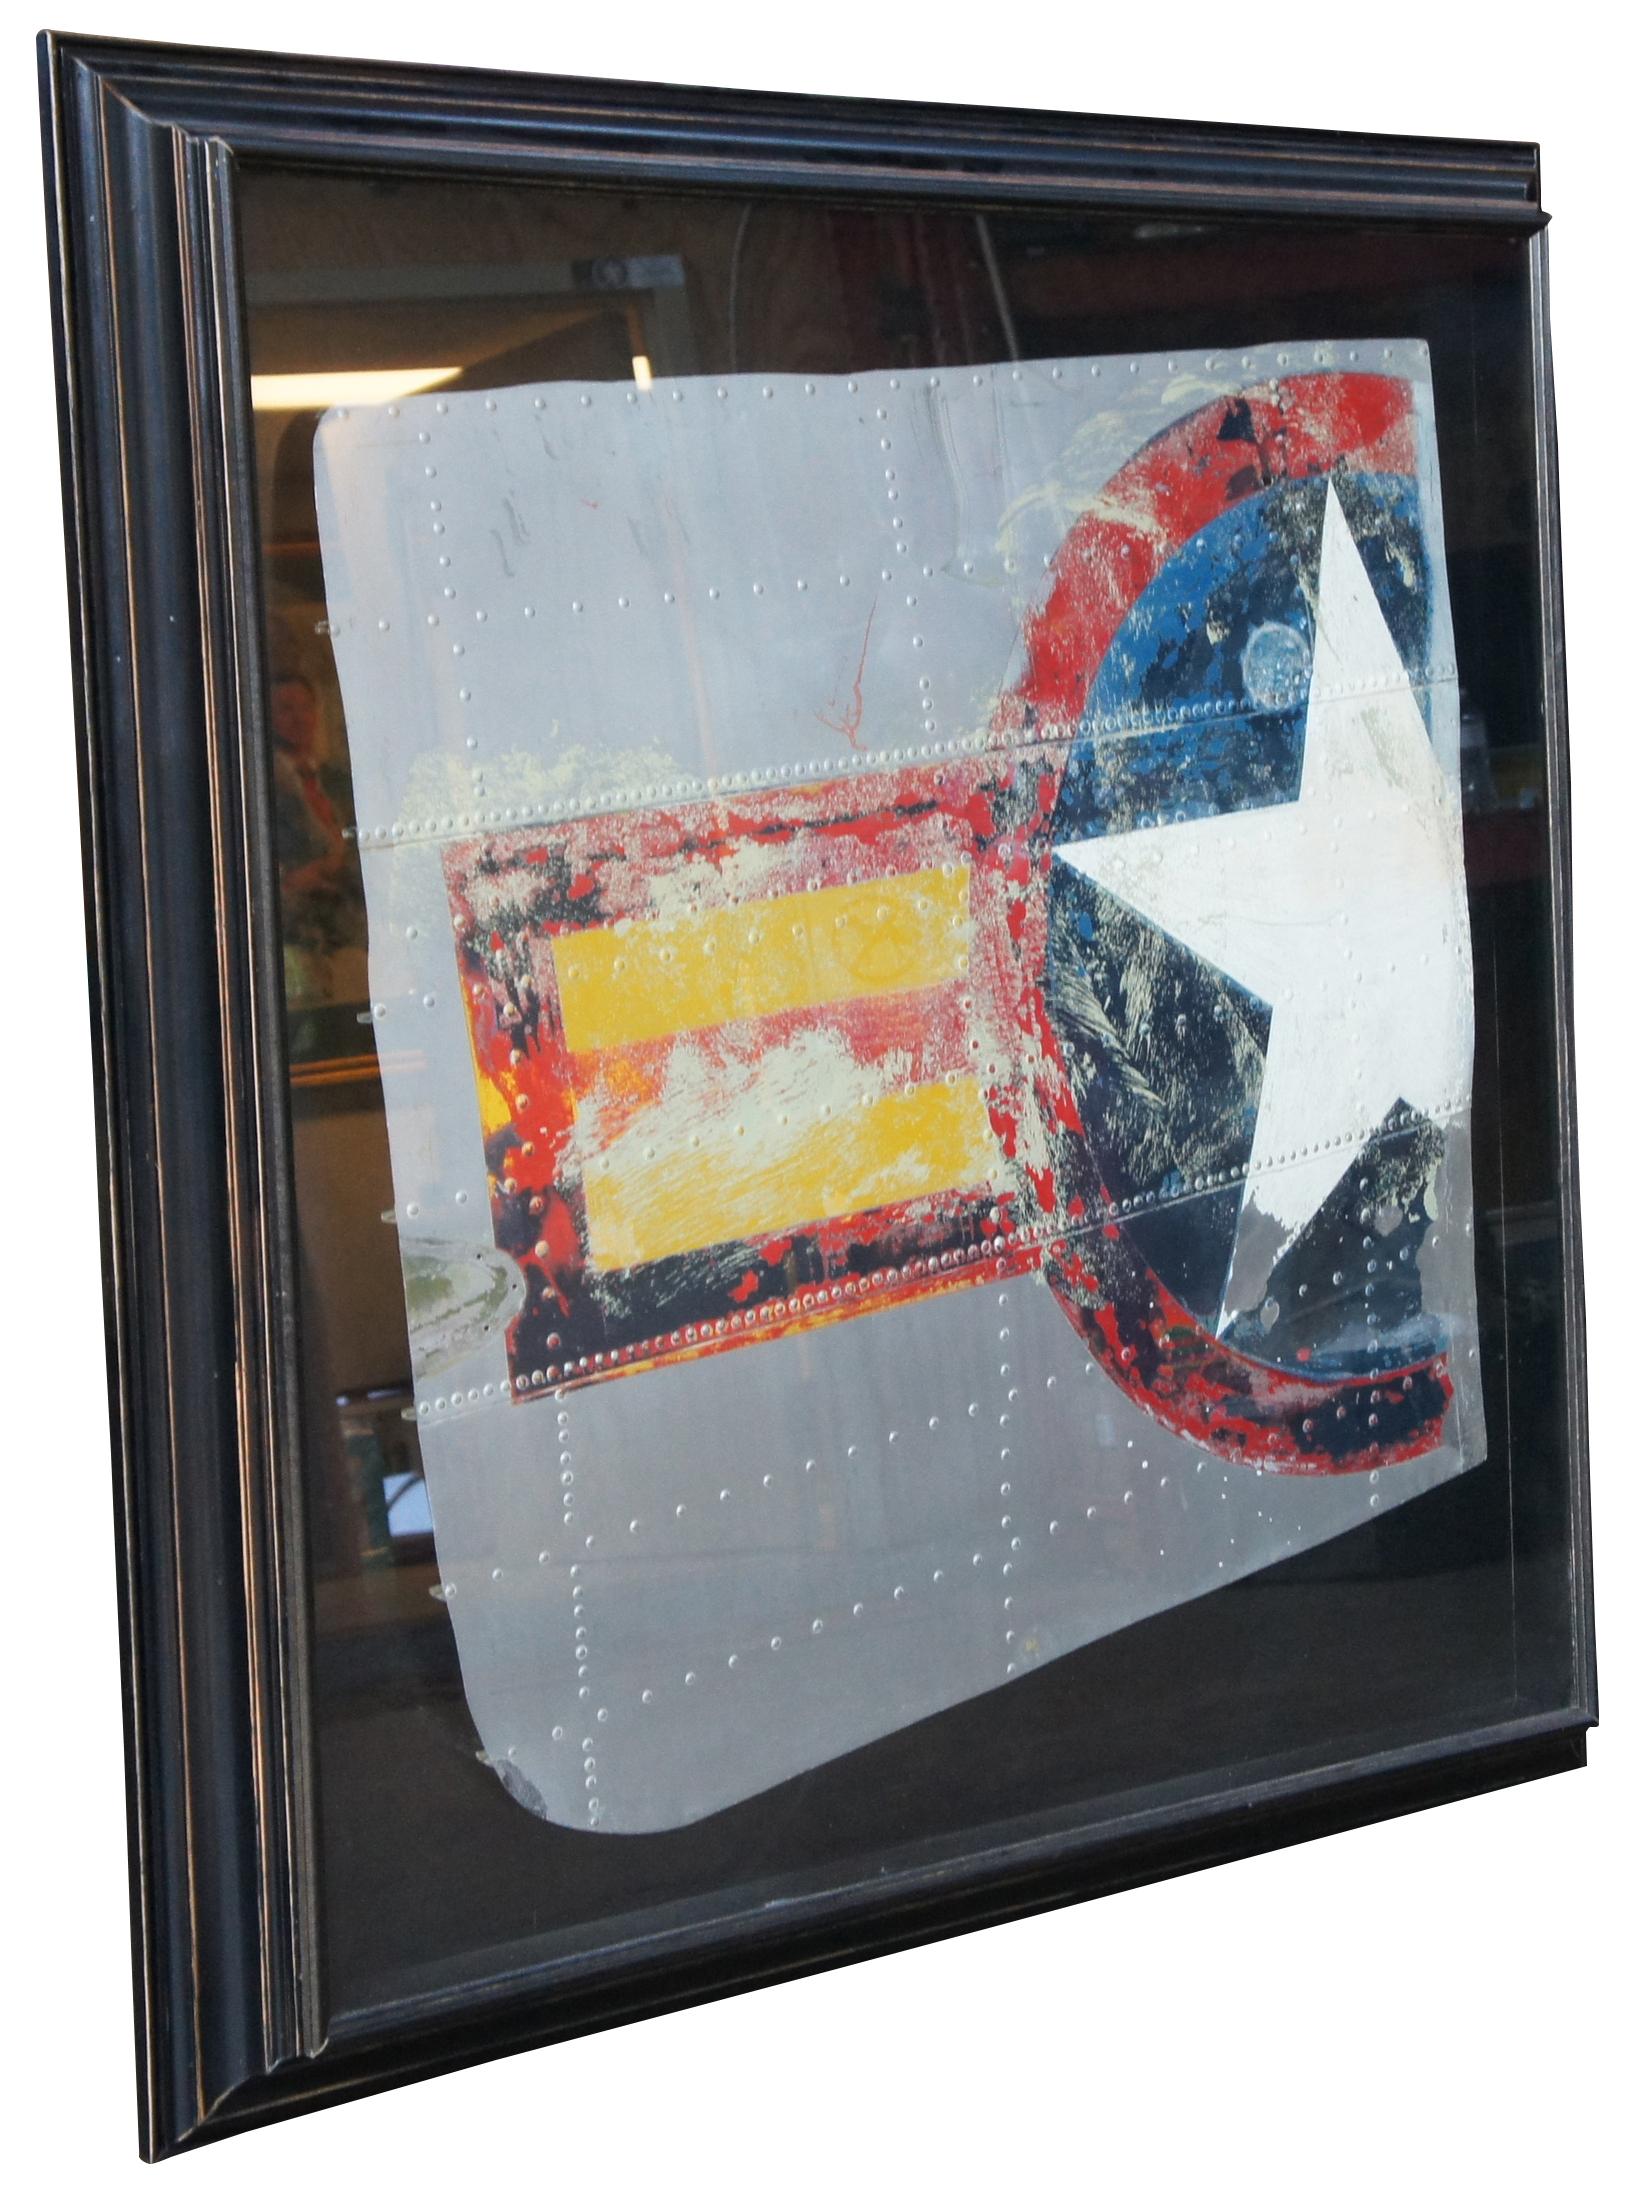 Antique World War II era United States Army Air Force airplane fuselage segment, mounted in a shadowbox frame and featuring the stars and bars decal insignia.

Sans Frame - 40” x 39”